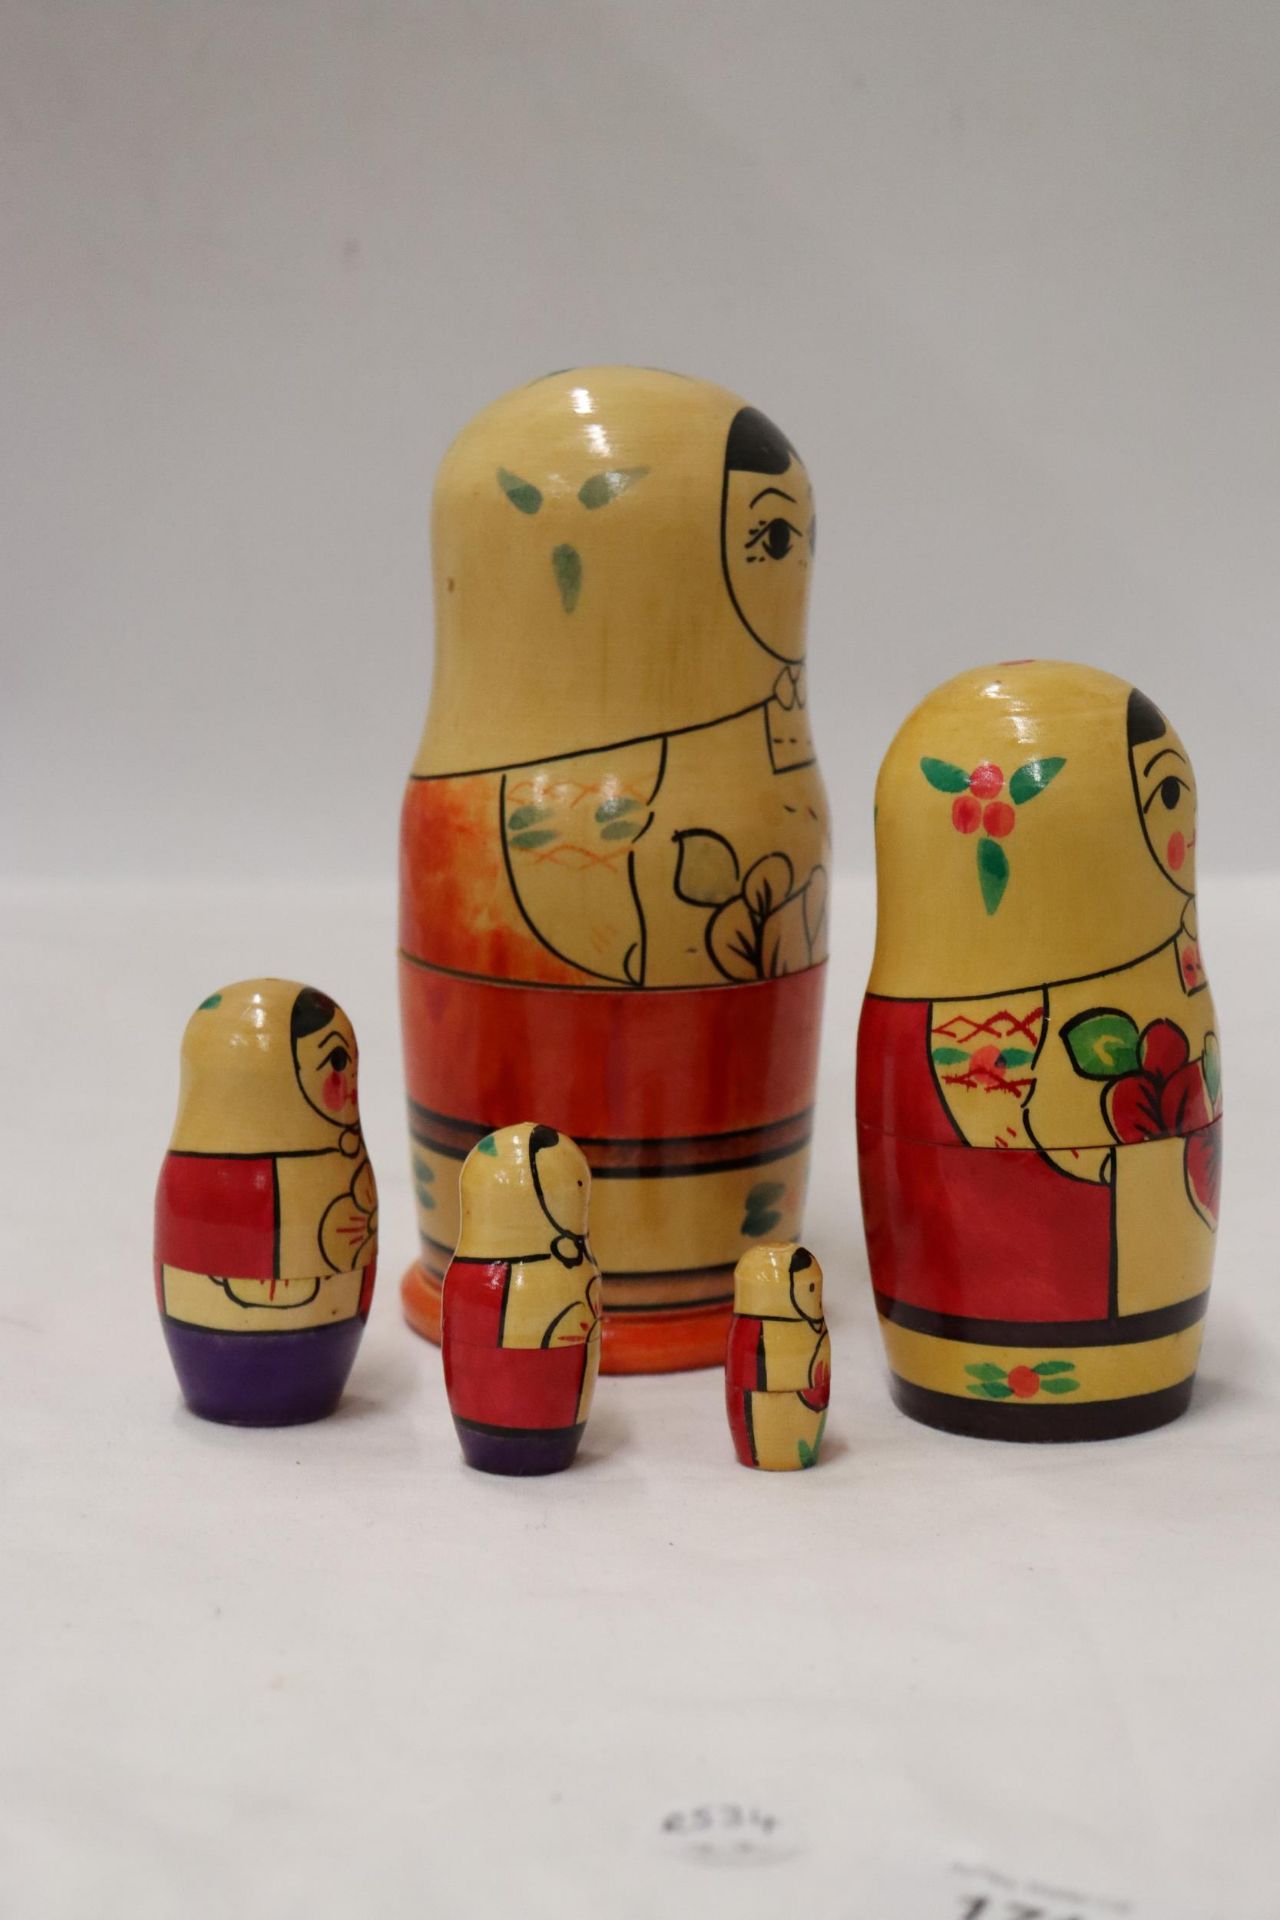 A LARGE RUSSIAN NESTING DOLL - Image 5 of 7